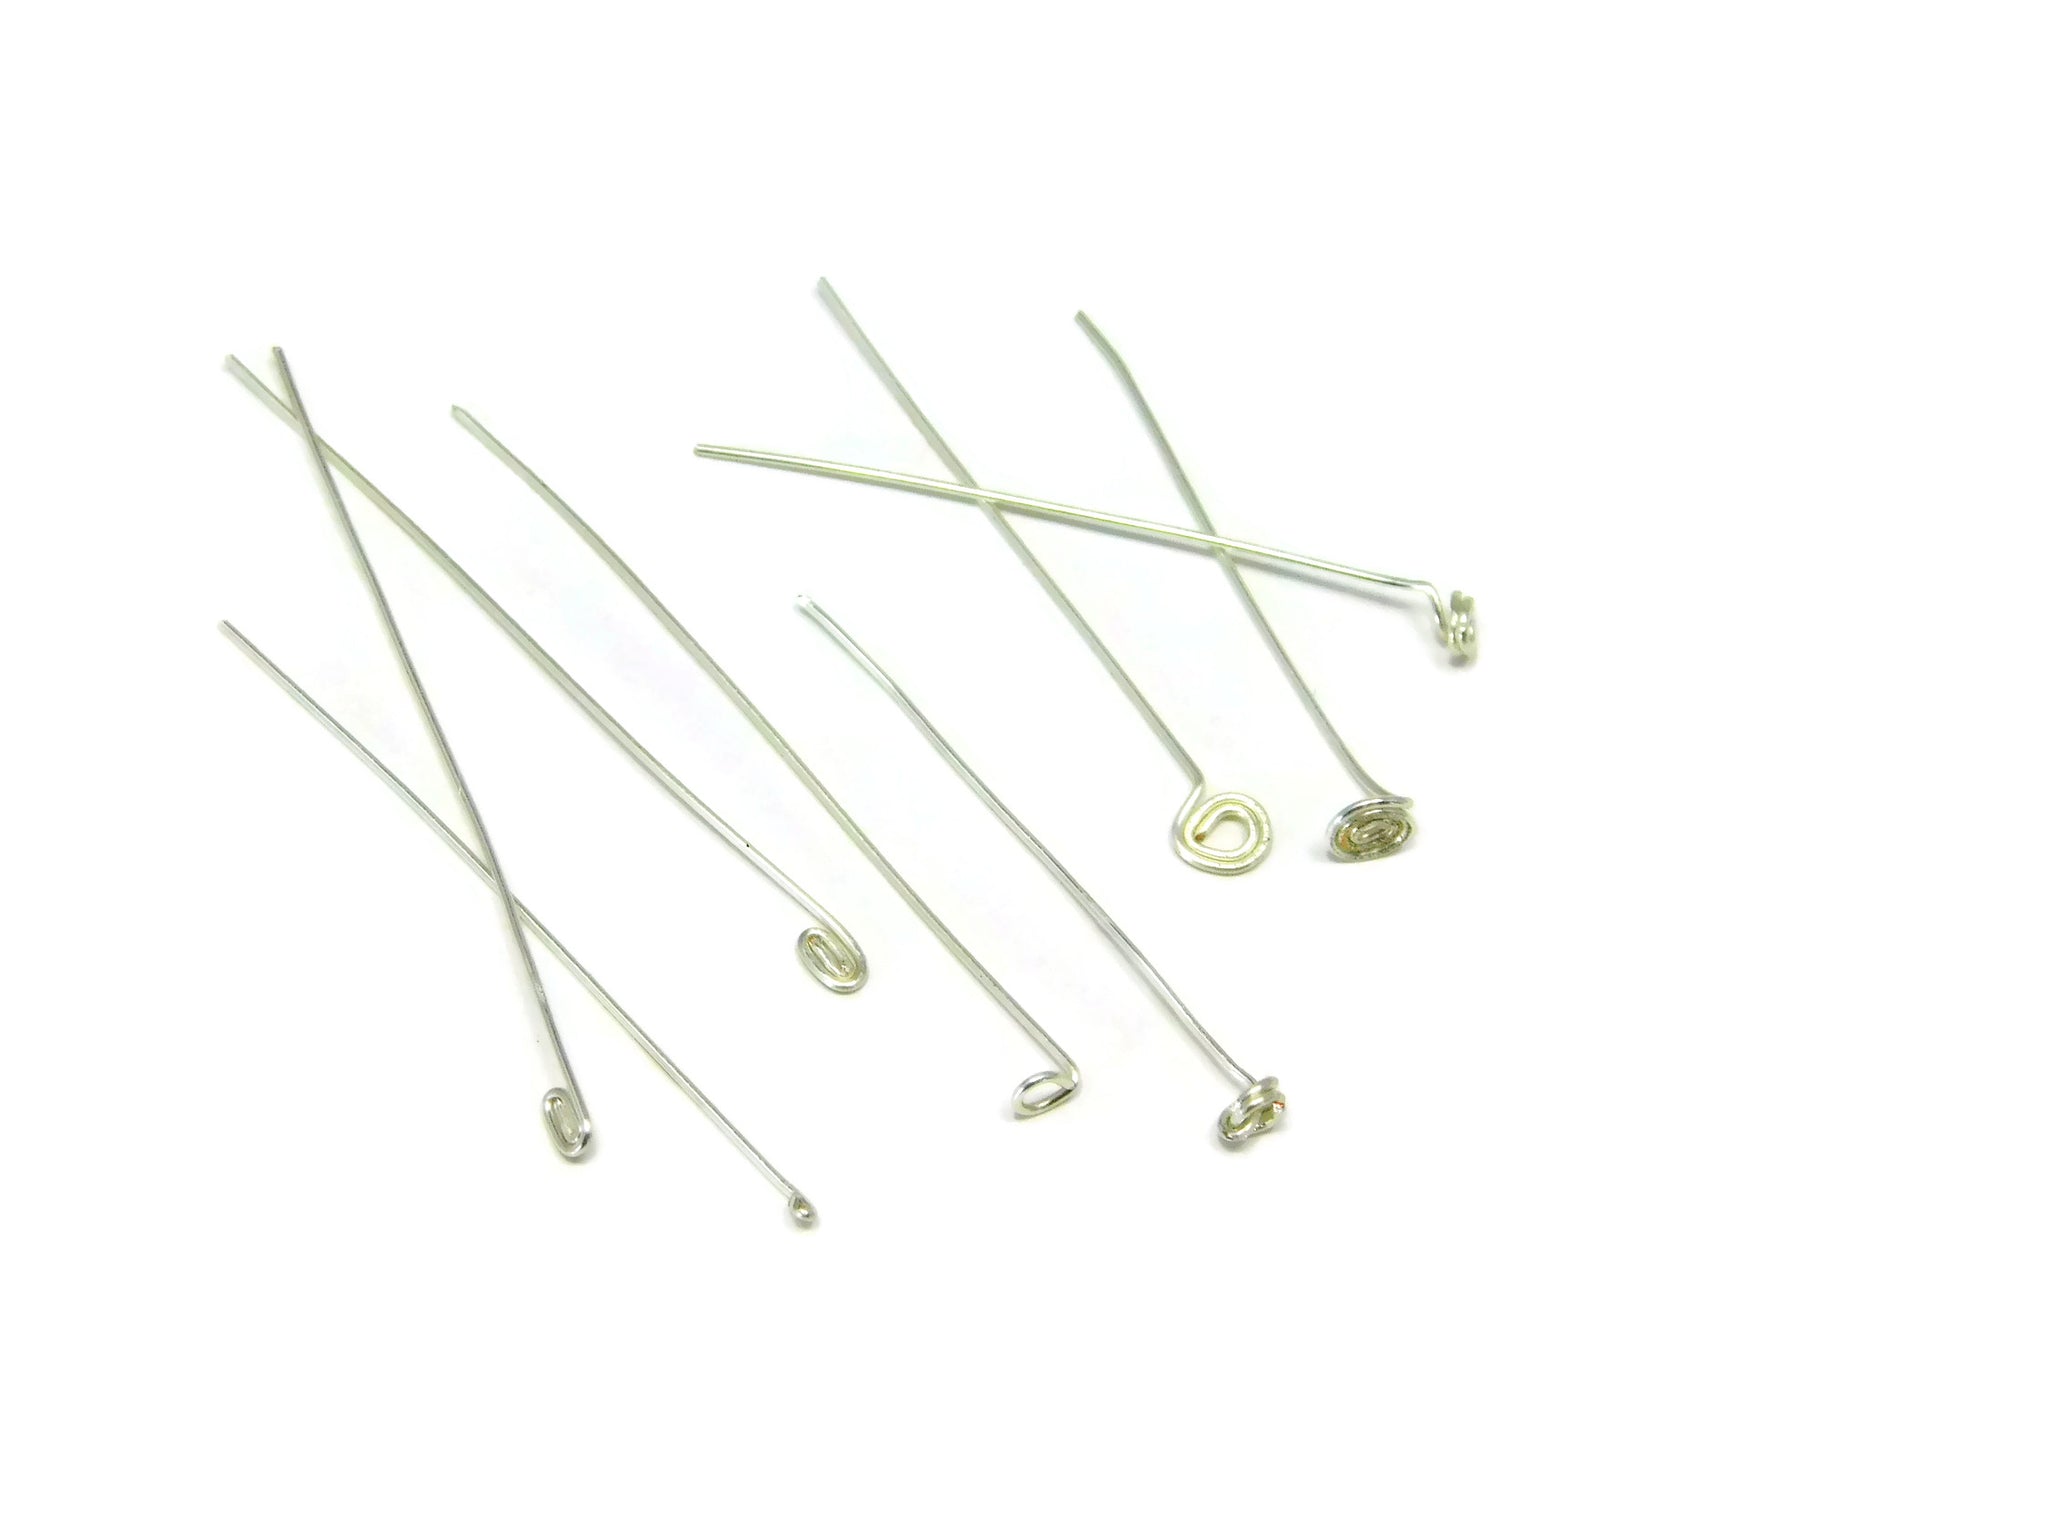 Seven Different Types of DIY Headpins!!